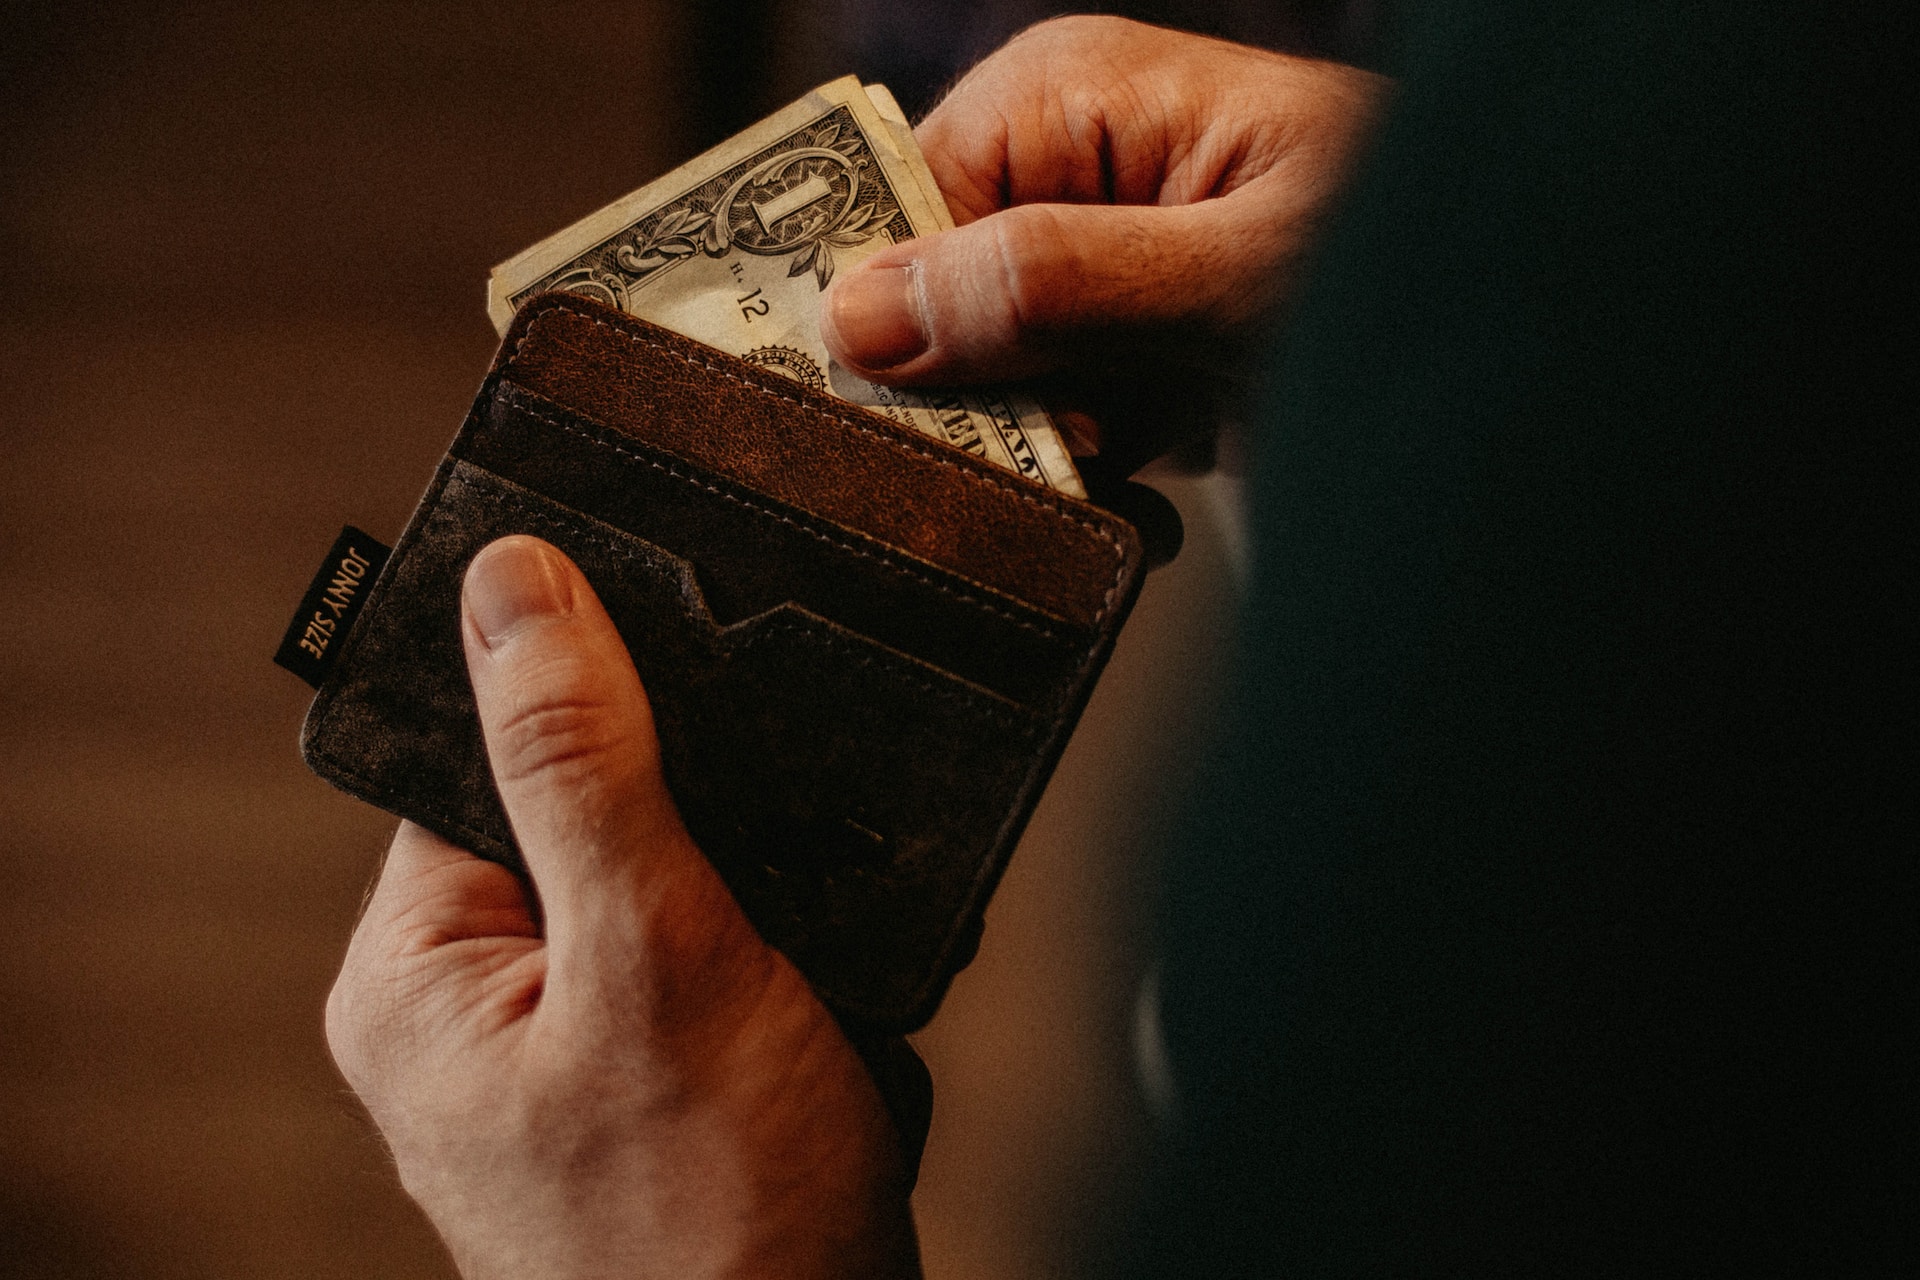 A man taking money out of his wallet.